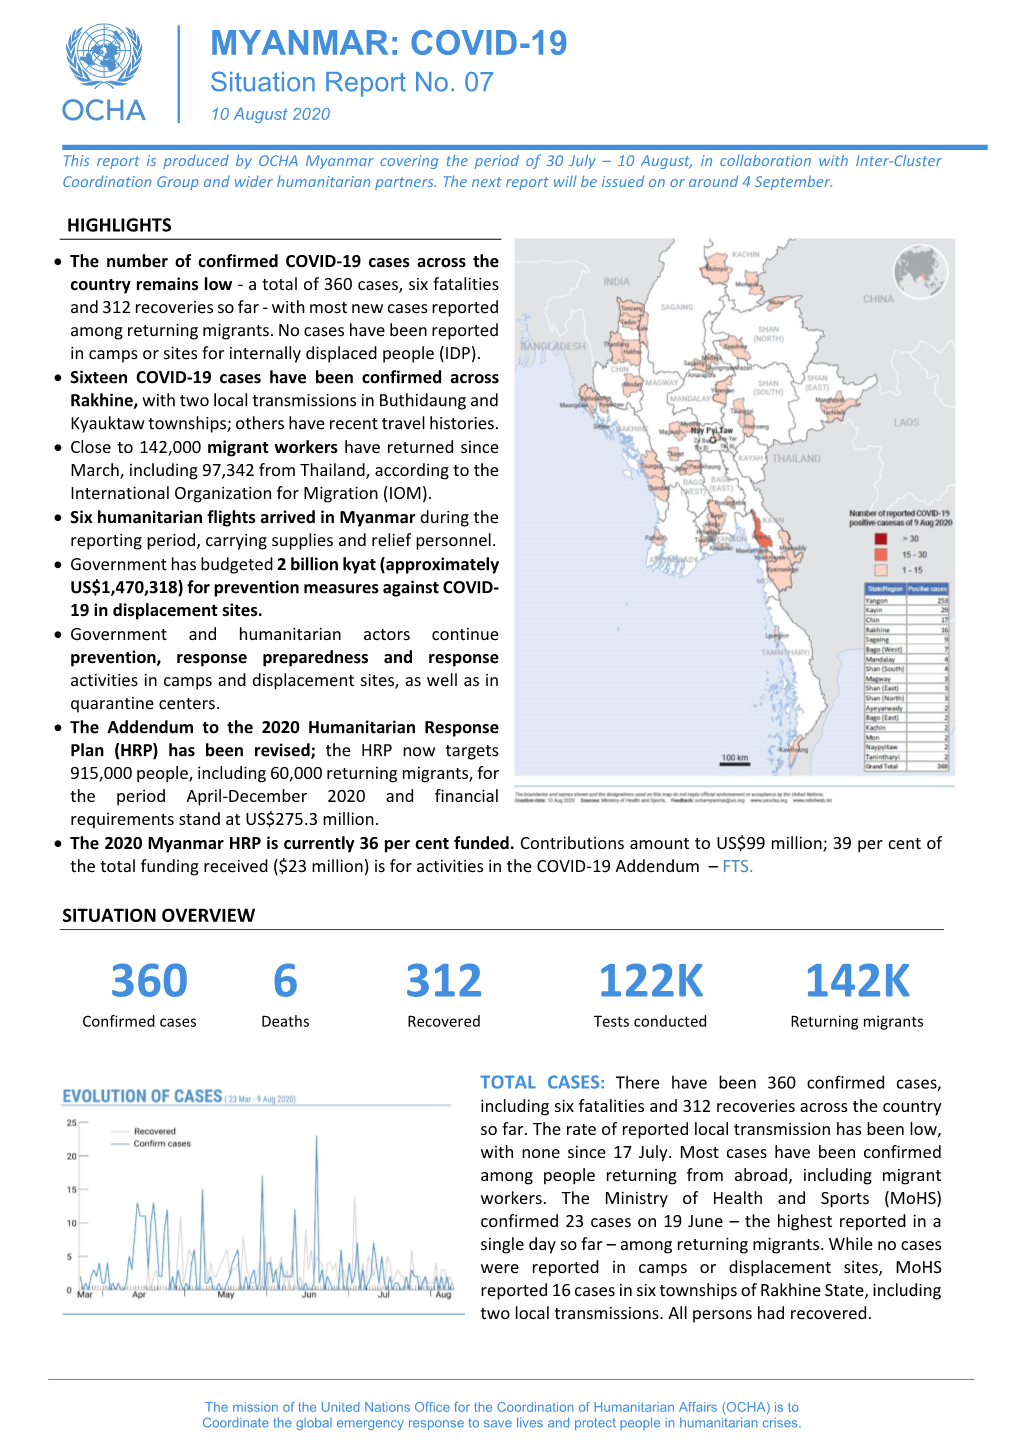 OCHA Myanmar Covering the Period of 30 July – 10 August, in Collaboration with Inter-Cluster Coordination Group and Wider Humanitarian Partners